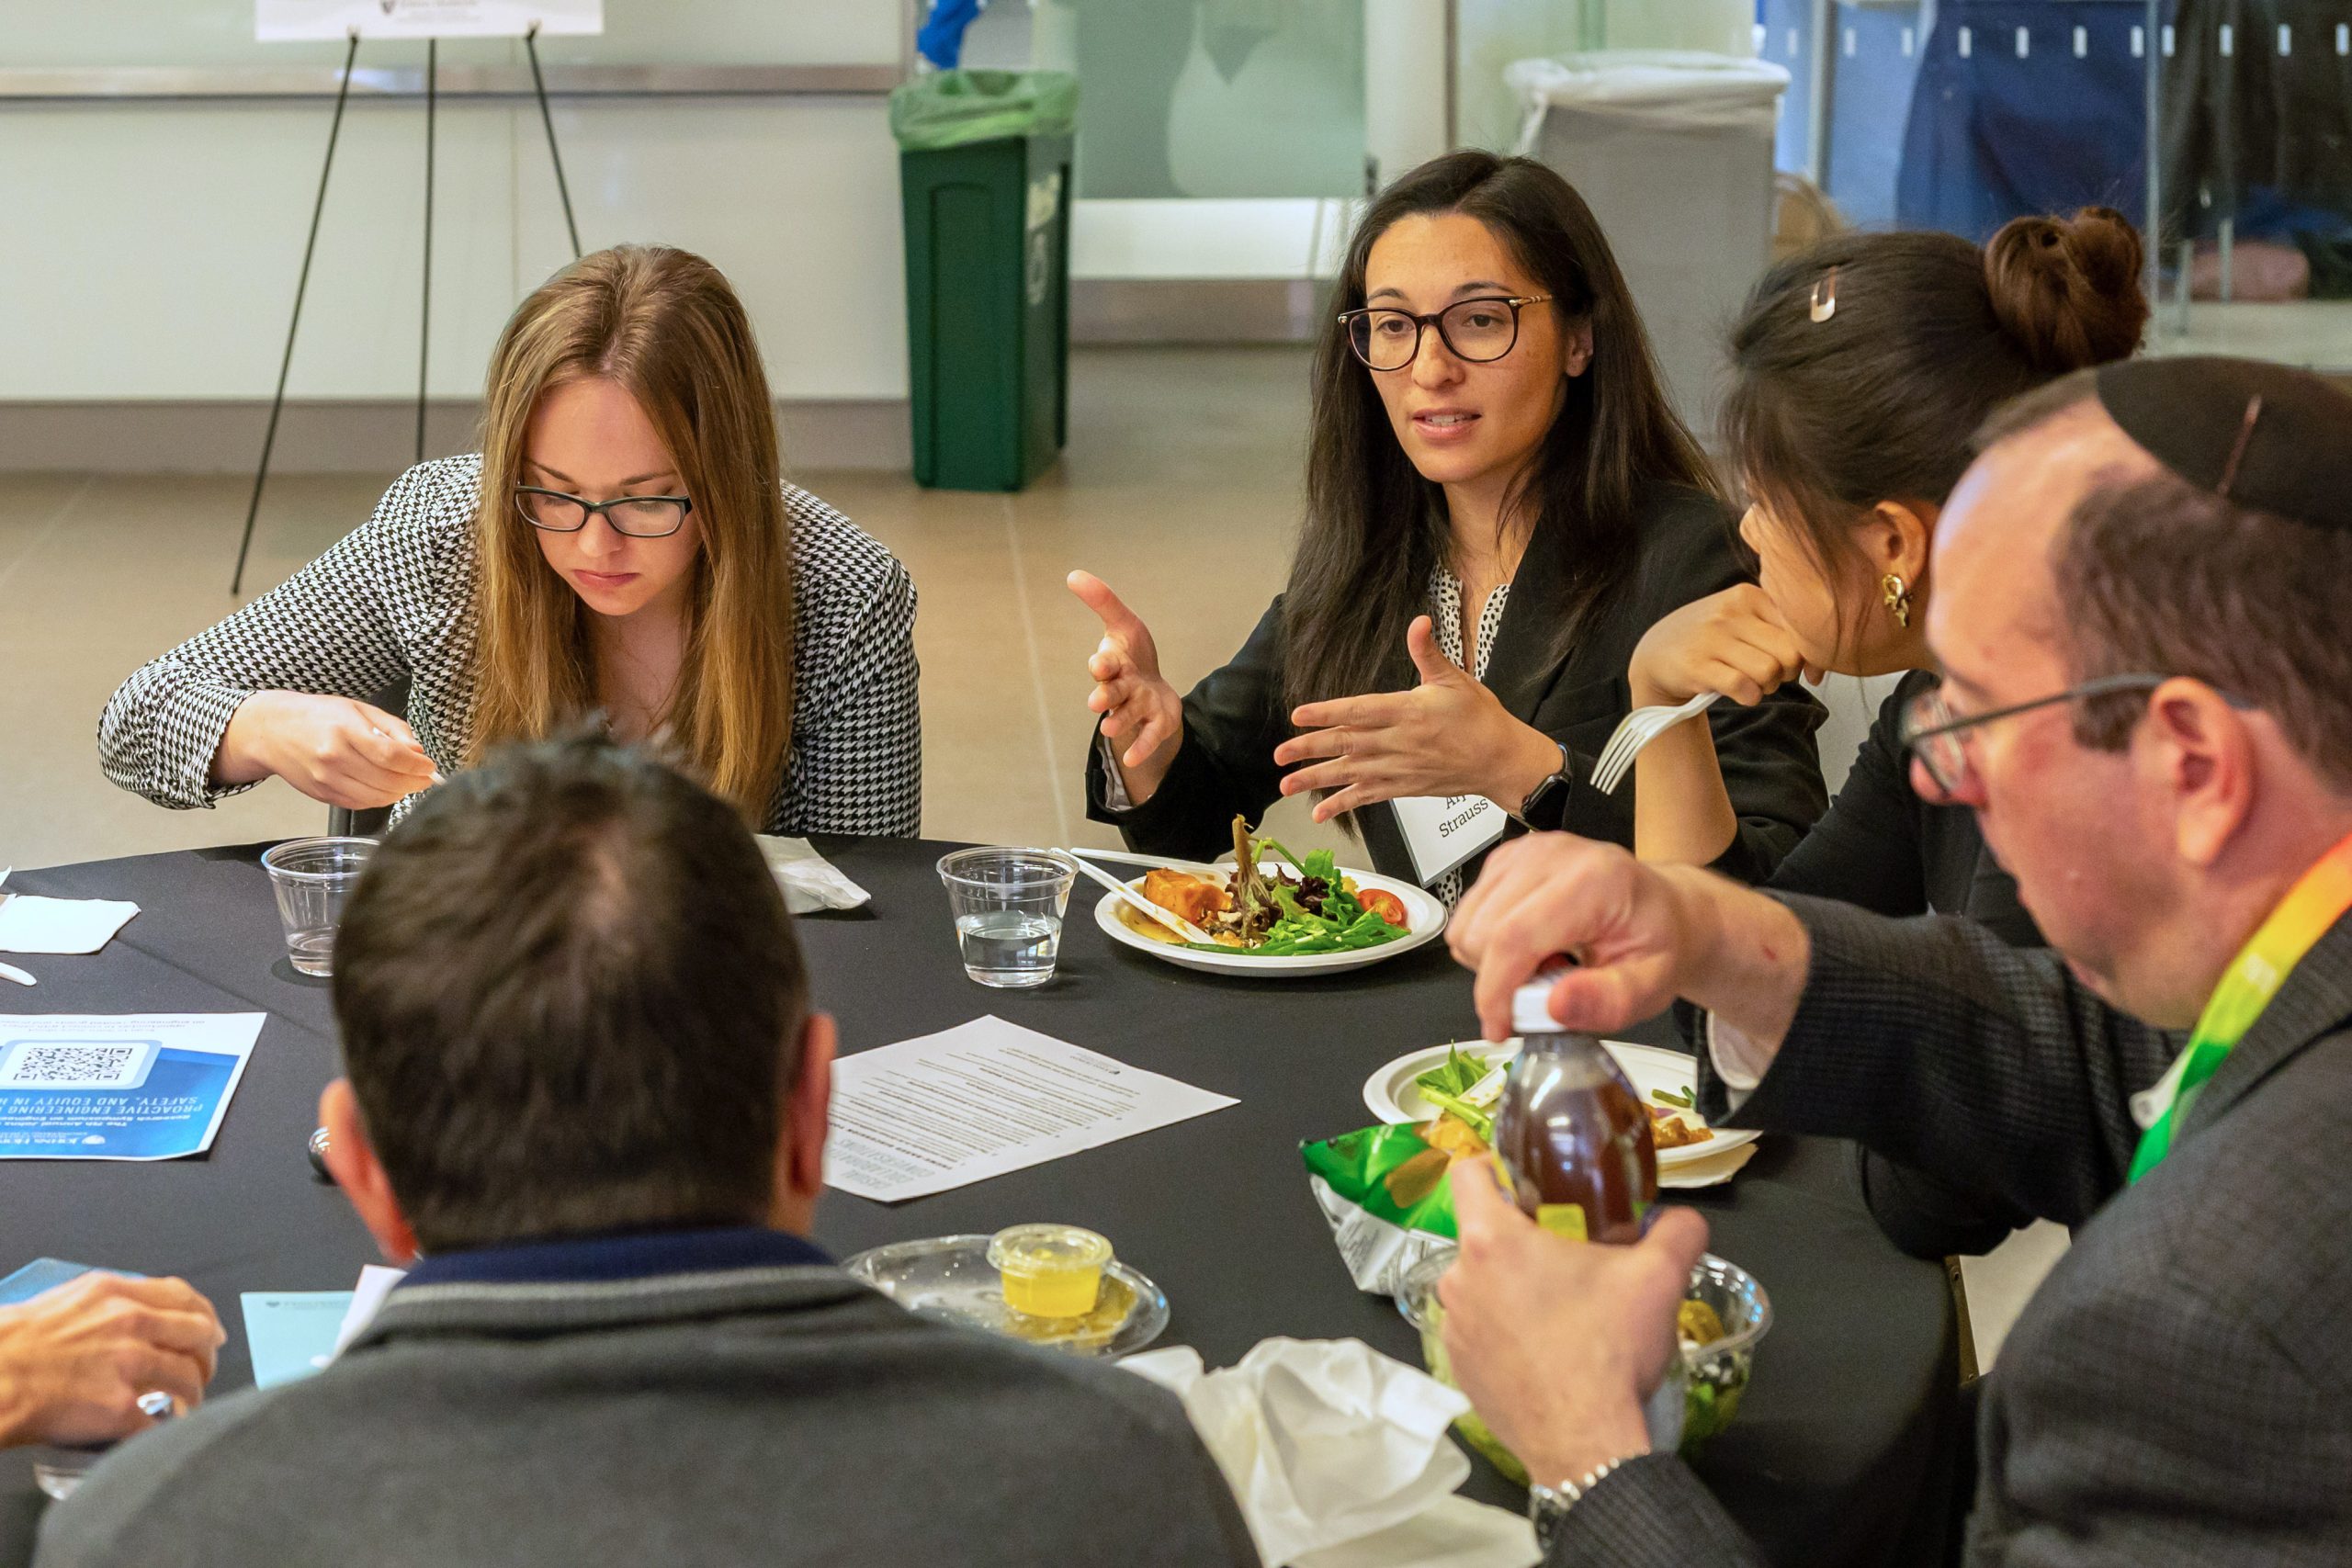 Led by Aly Strauss, researchers discuss at lunch at the 2023 Johns Hopkins Research Symposium on Engineering in Healthcare.